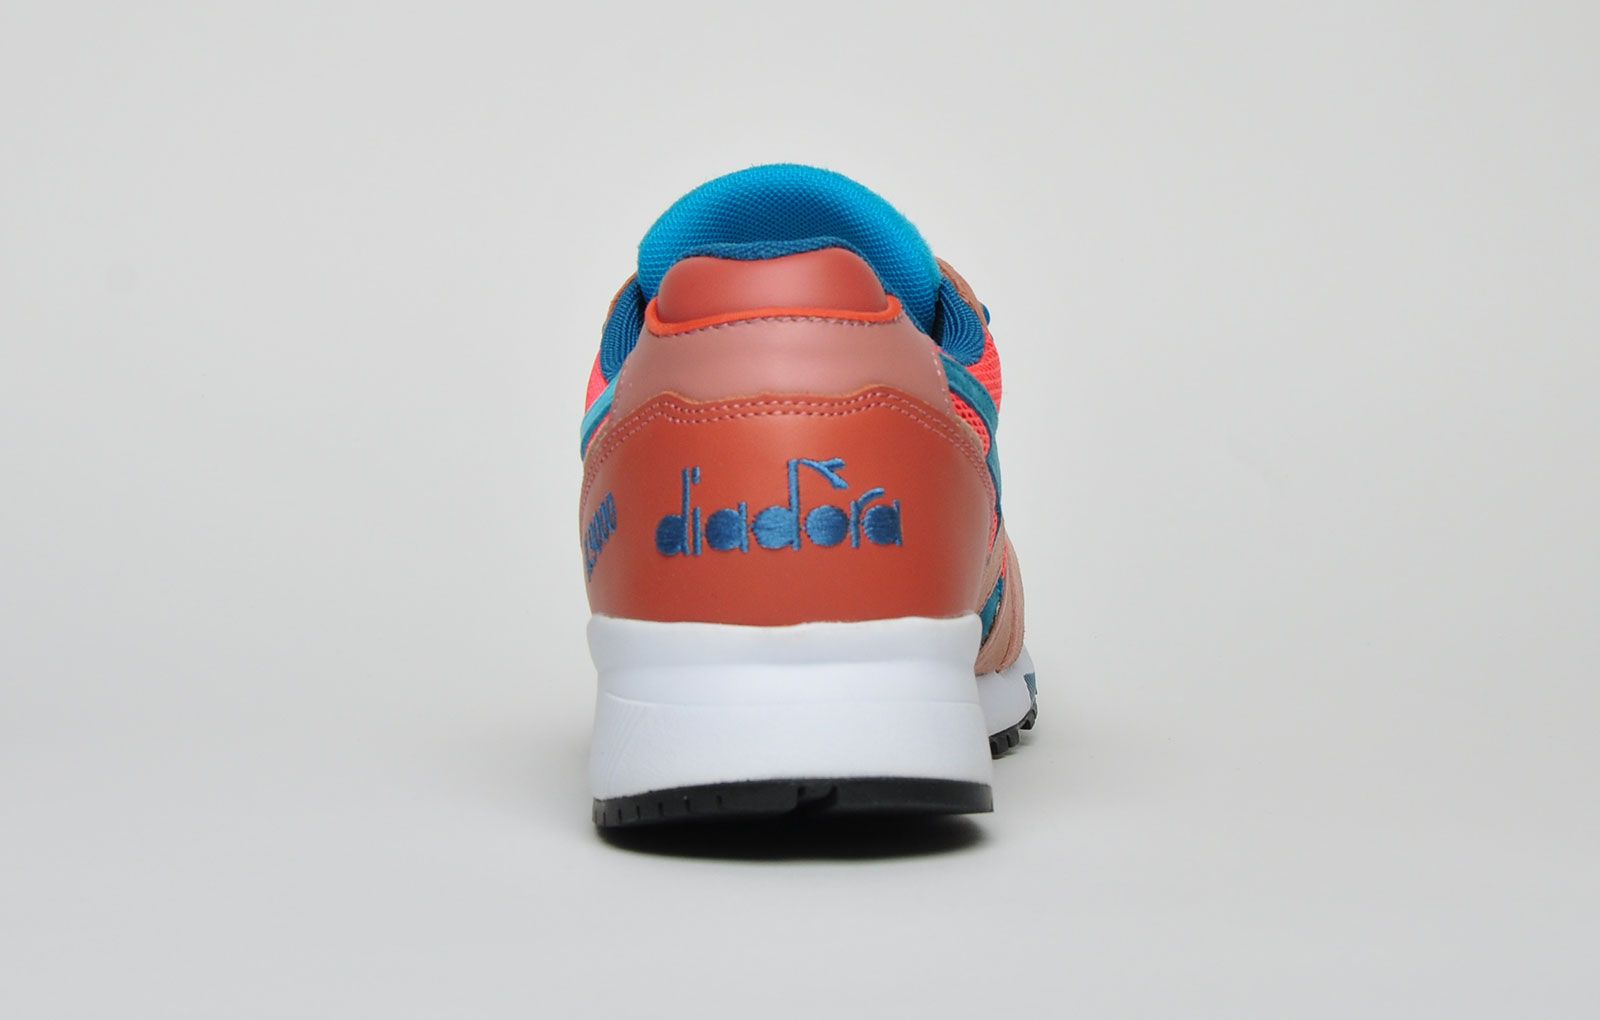 Delivering style and substance throughout your everyday wear, the Diadora N 9000 Premium is an on-trend men’s trainer that won’t let you down when it comes to comfort and fit. Constructed with a leather upper fused with textile panels and a retro inspired midsole for visual appeal Featuring supportive cushioning to the heel and a padded tongue and inner lining, this trainer is as supportive and comfortable as it is lightweight. <p class=